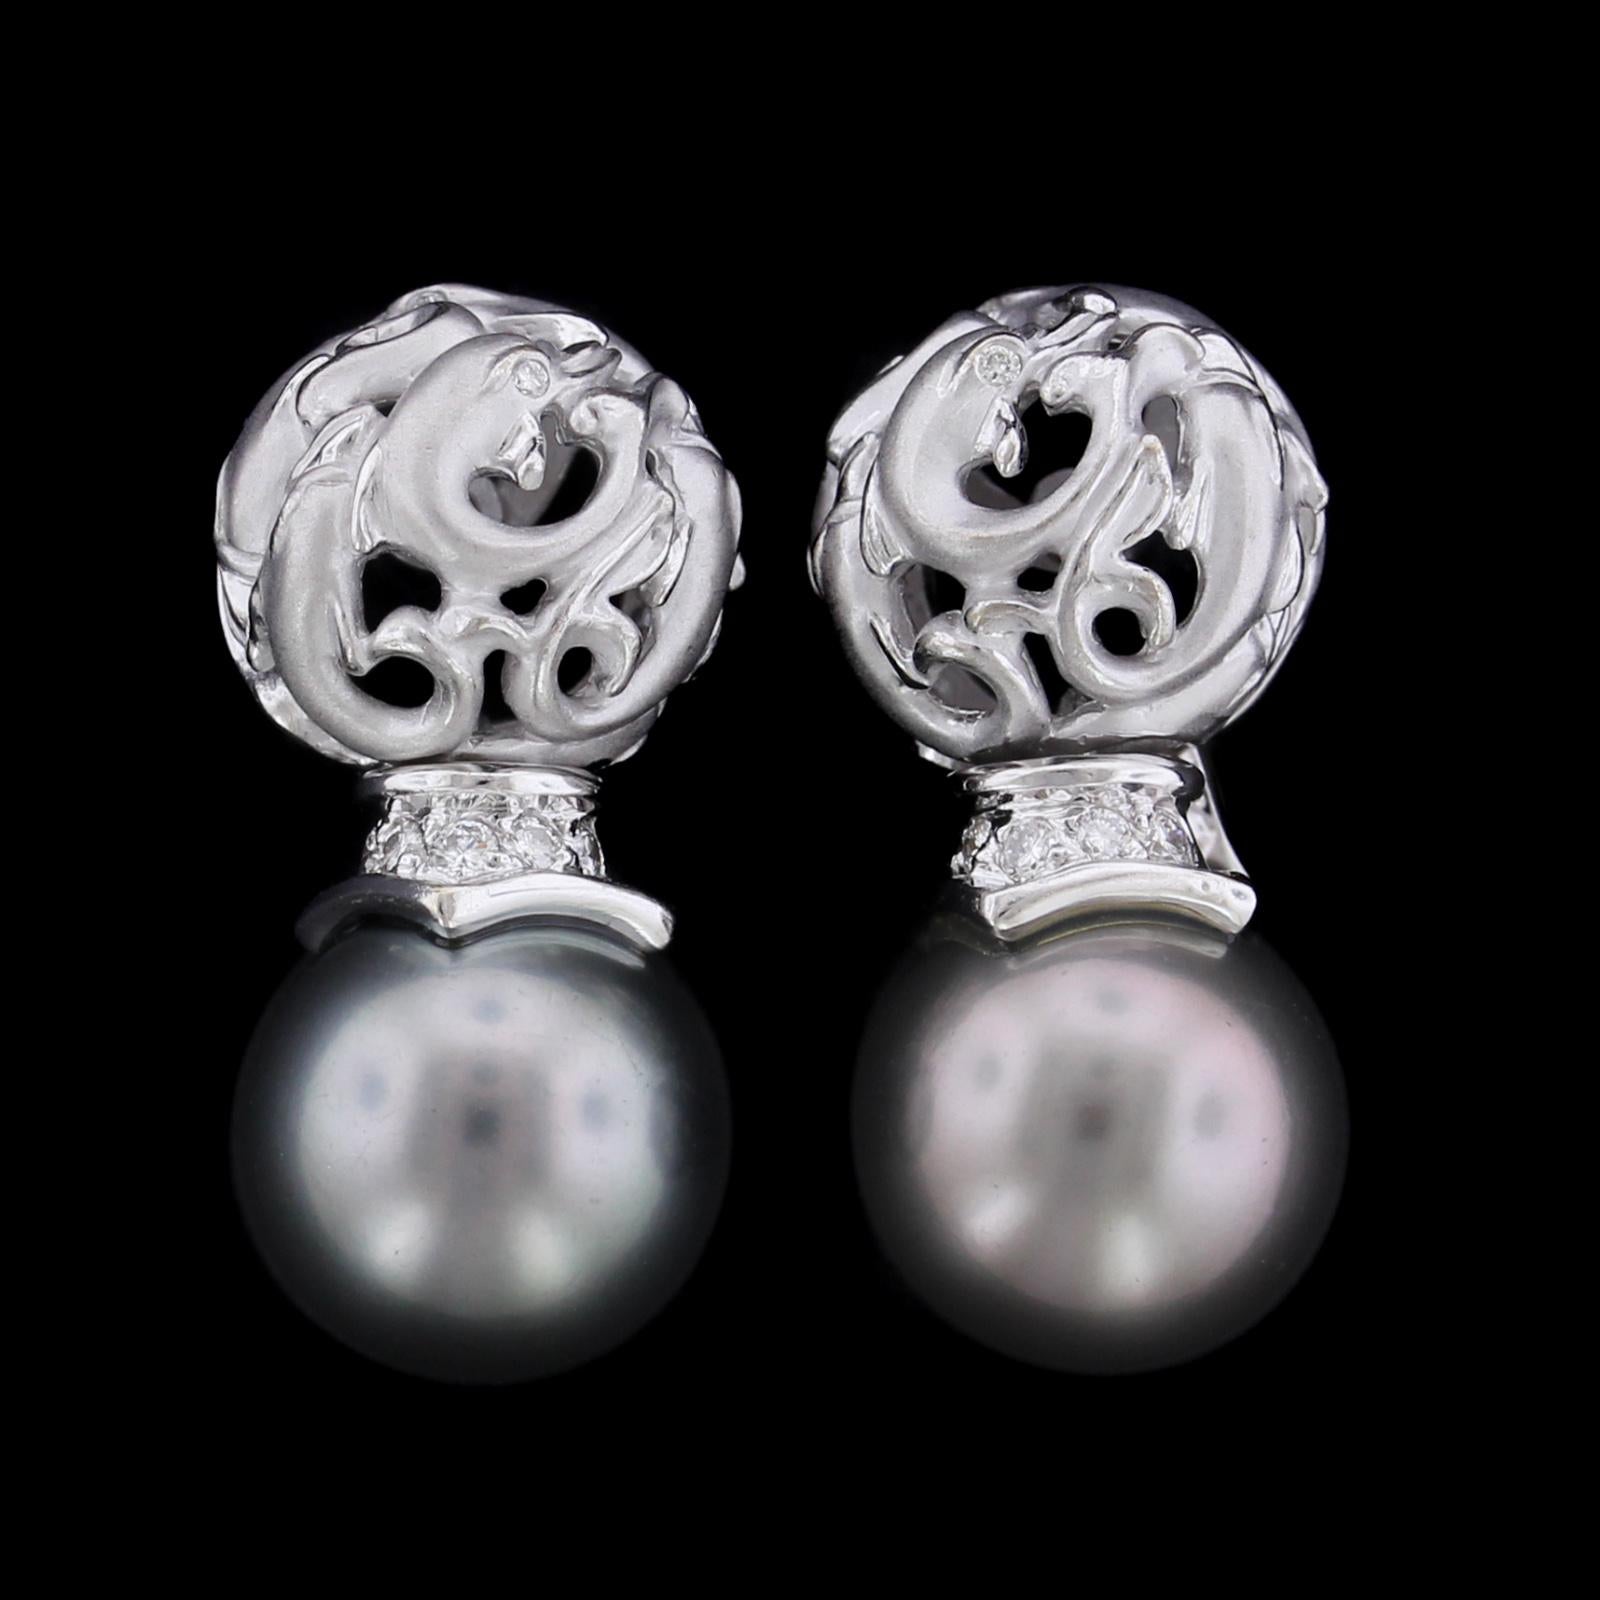 Carrera Y Carrera 18K White Gold Cultured Black Pearl and Diamond Dolphin
Earrings. The earrings suspend two cultured pearls each measuring 10.50mm.,
further set with full cut diamond accents, approx. .15cttw., HI color, SI clarity, length 1